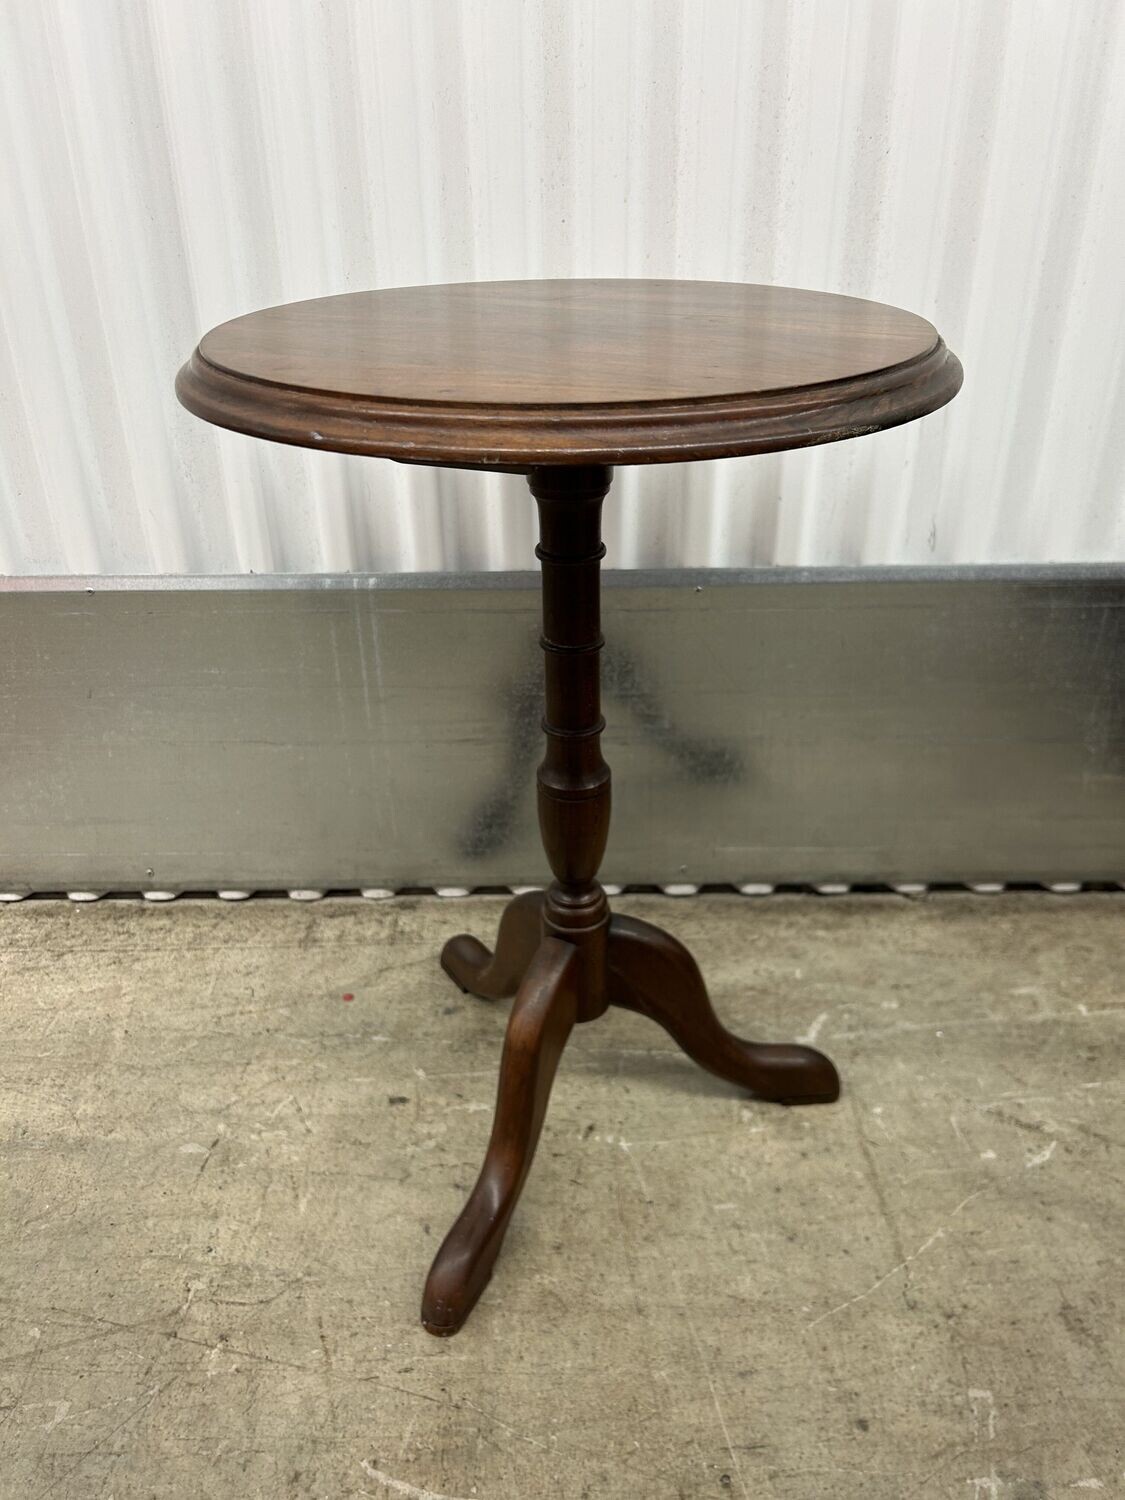 Small Round Pedestal Table #2103 ** 3 days to sell, full prce